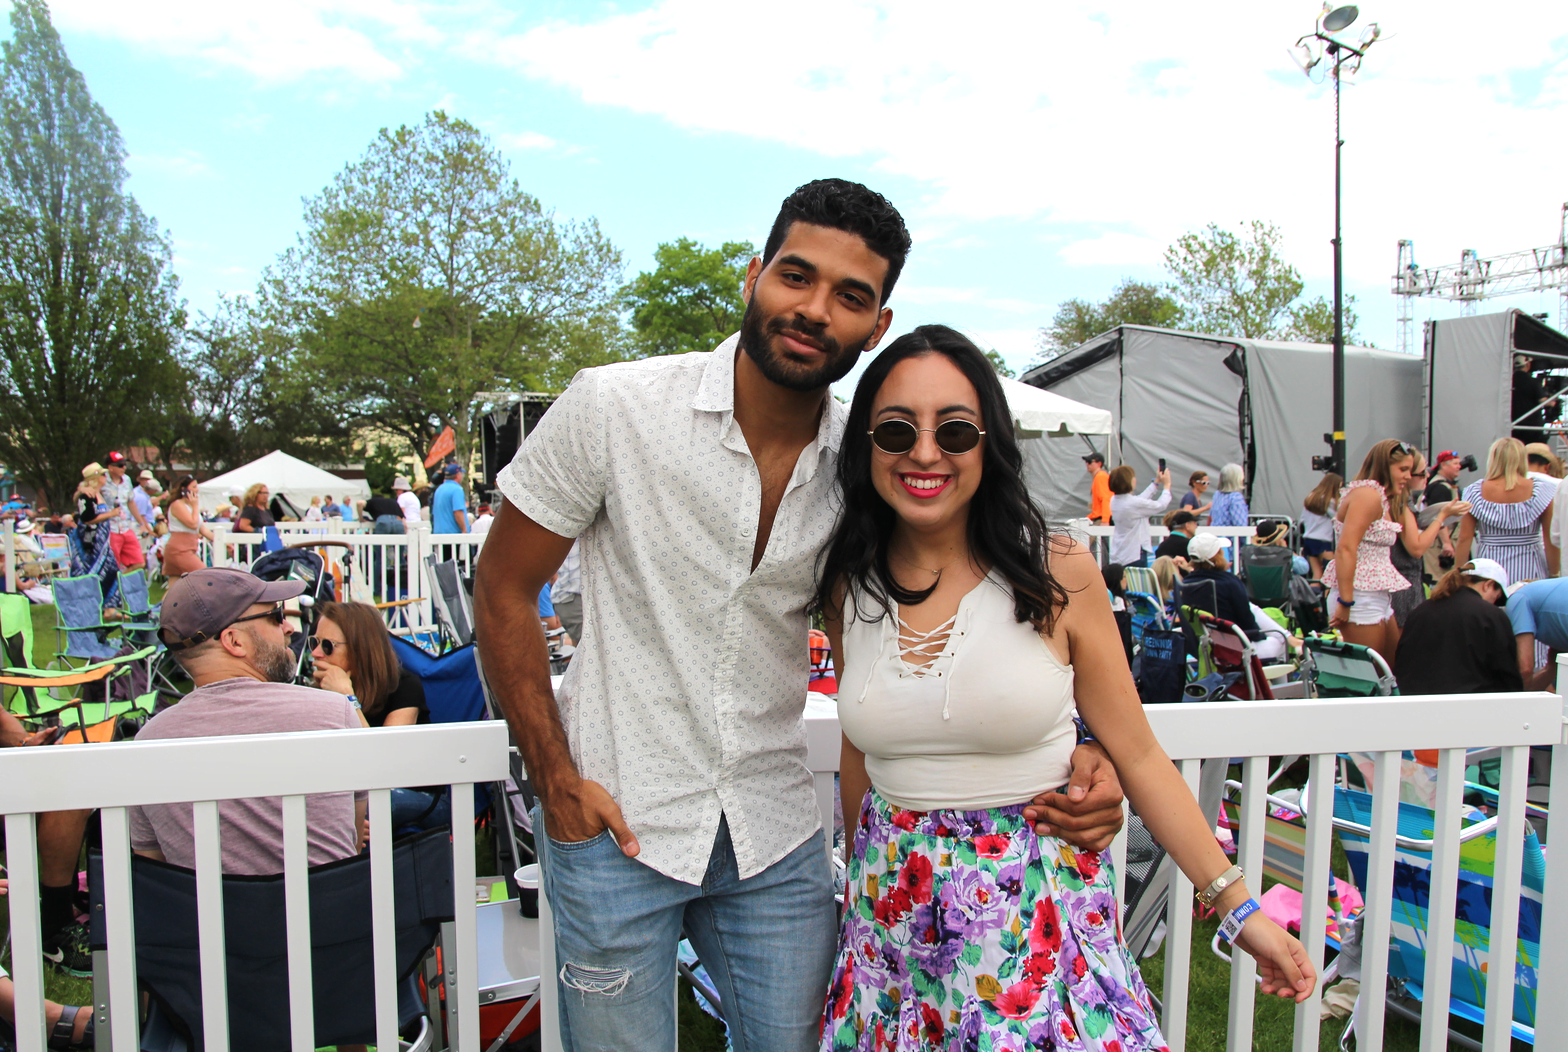 Greenwich Town Party 2019 was the ninth consecutive event showcasing local bands and headliners. May 25, 2019 Photo: Leslie Yager